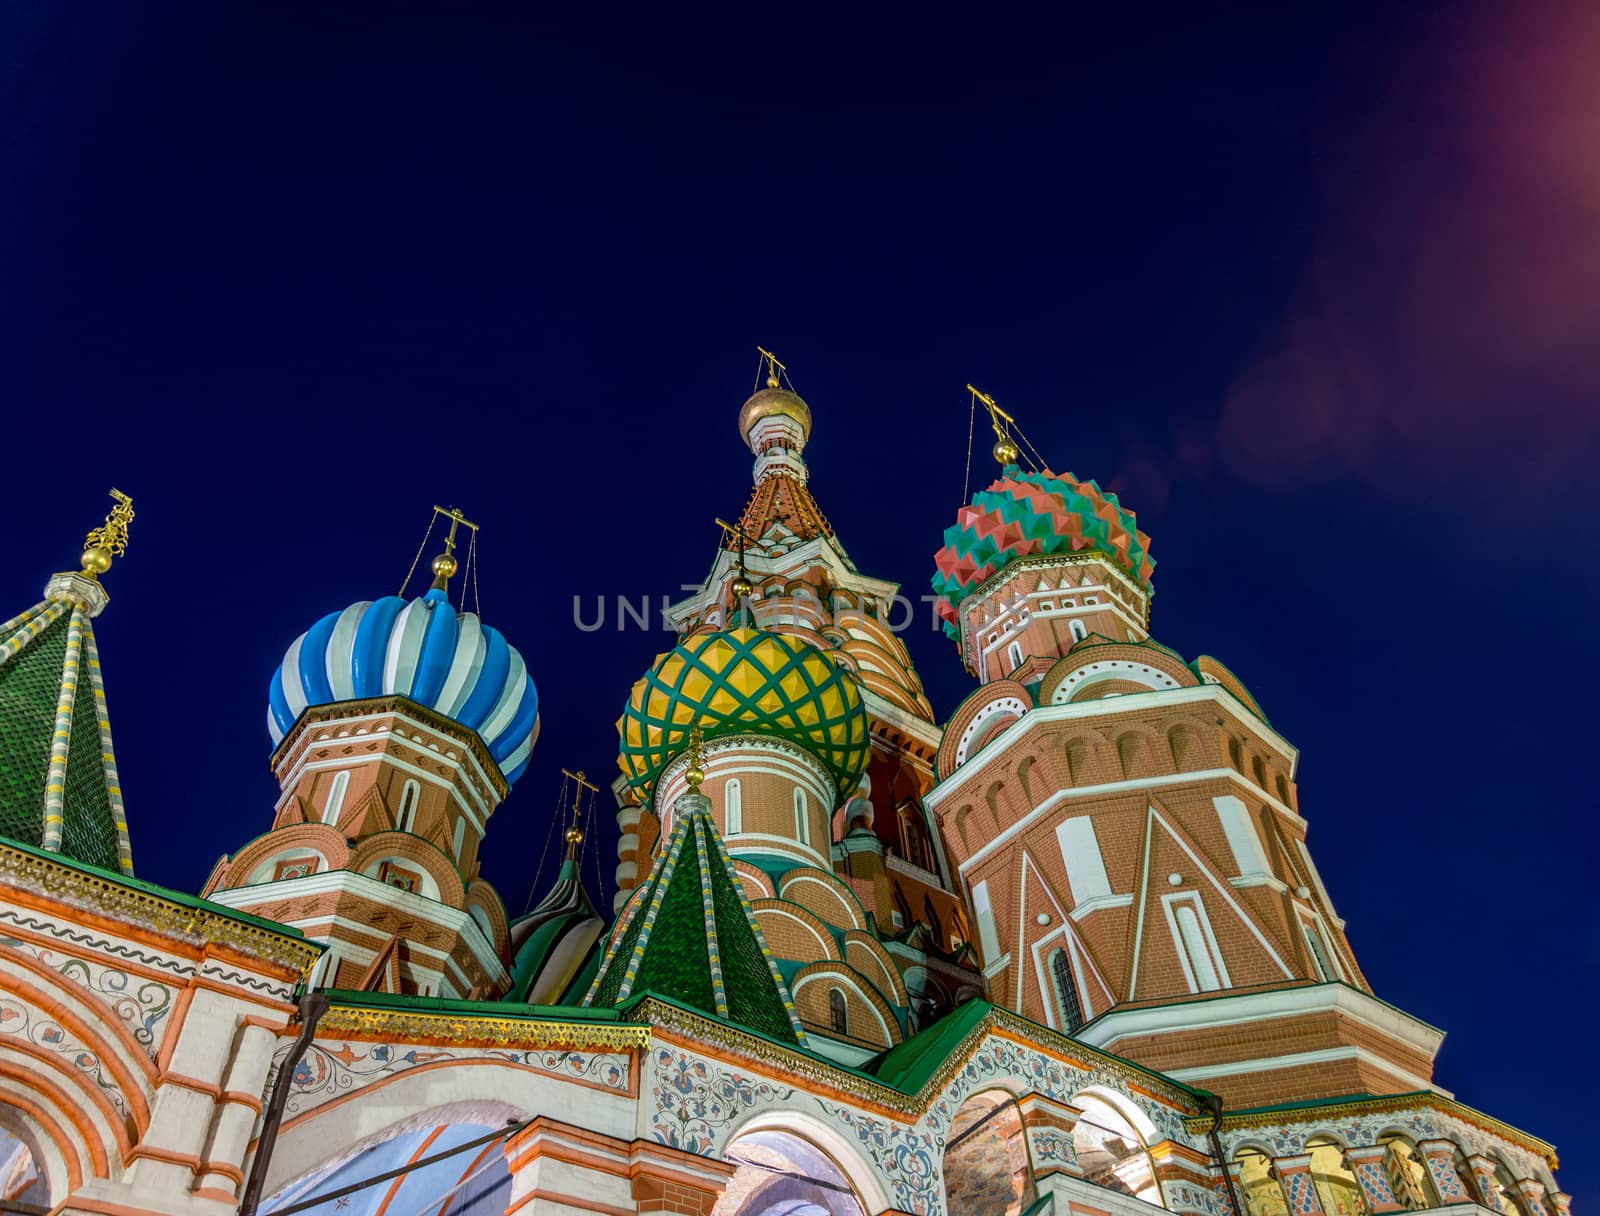 St Basil's Cathedral at night. by pomemick